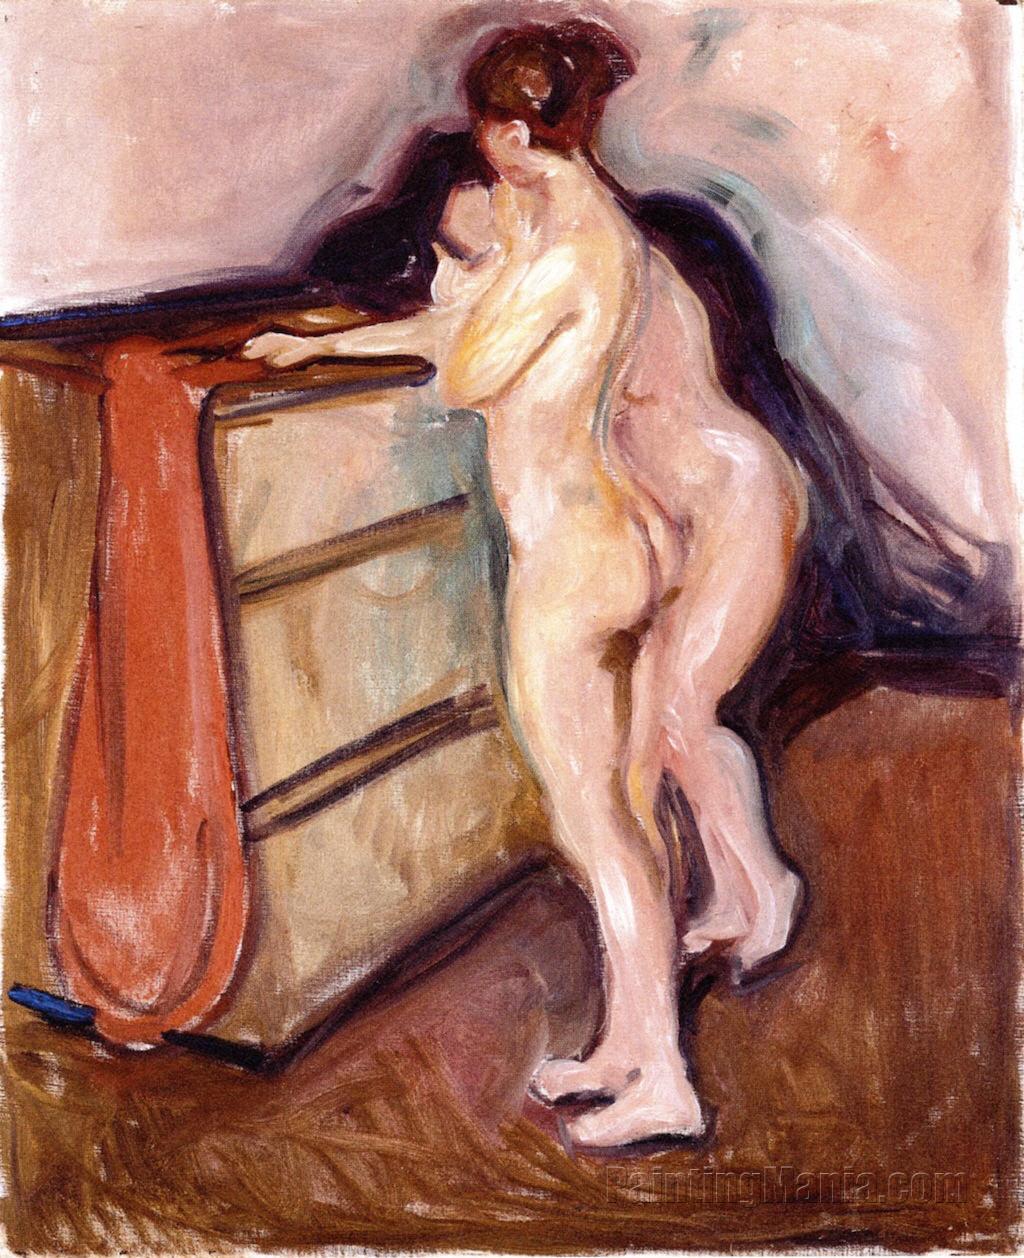 Two Nudes Standing by a Chest of Drawers